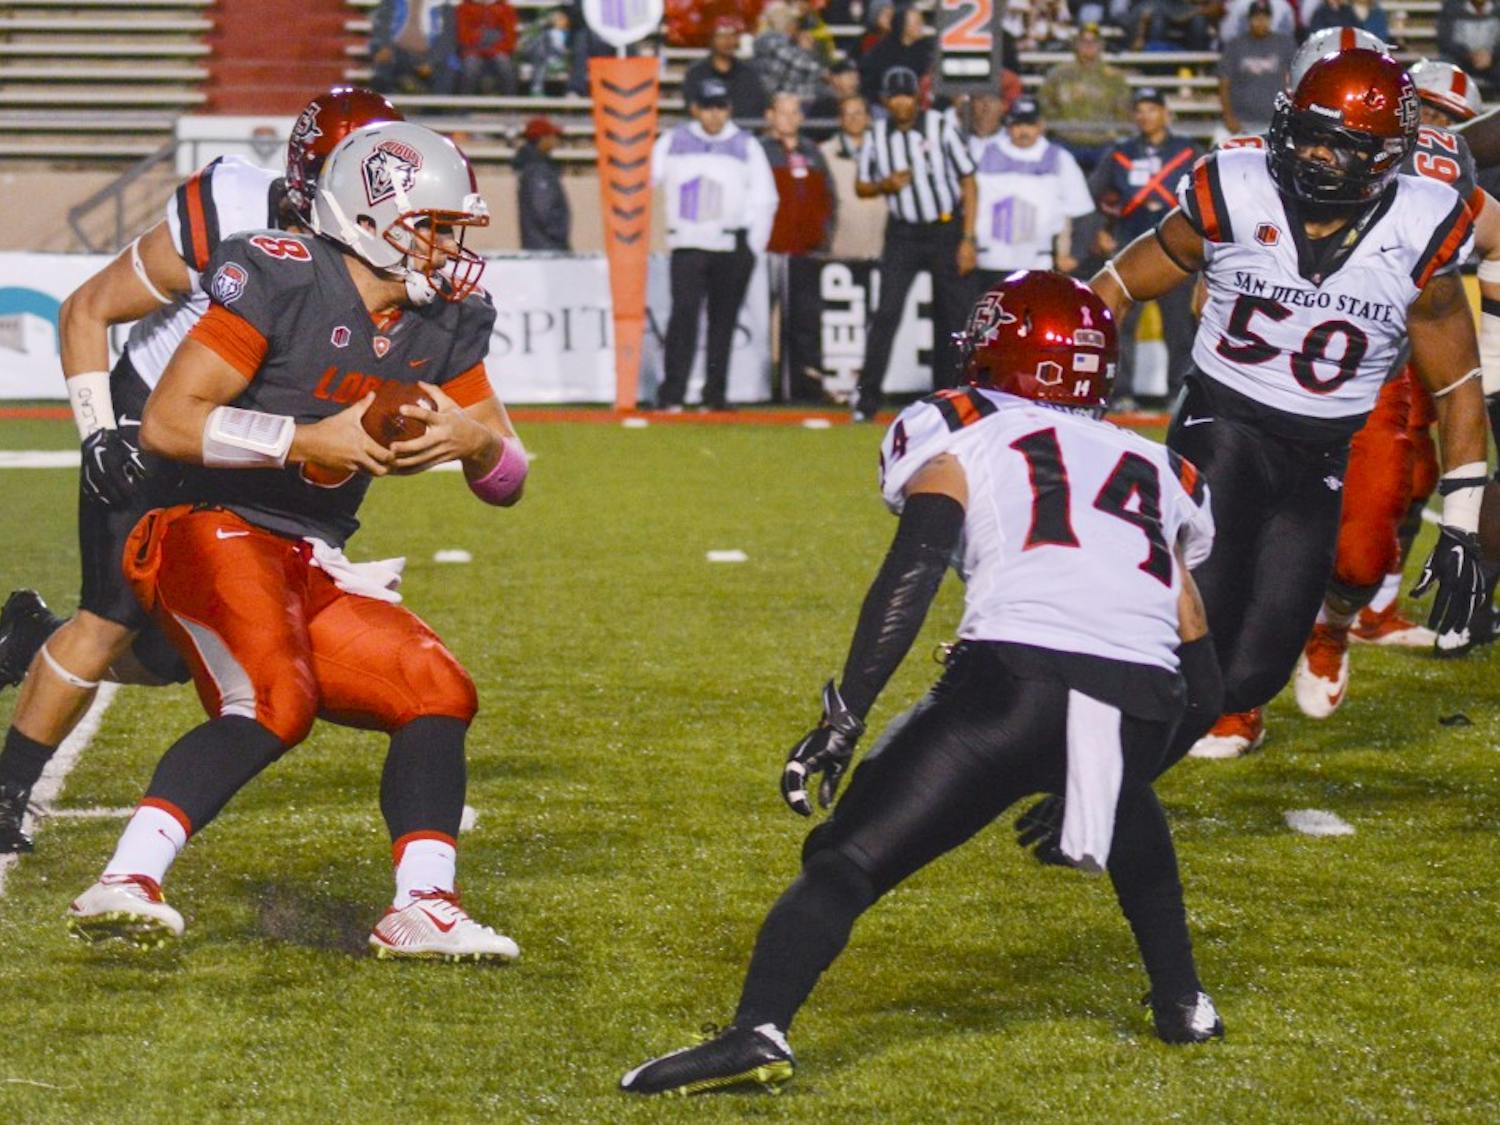 UNM quarterback Cole Gautsche (8) attempts to rush past the San Diego State Aztecs at University Stadium on Friday, Oct. 10. Gautsche and Lamar Jordan, another Lobo quarterback, have spent the last three games splitting playing time on the field.